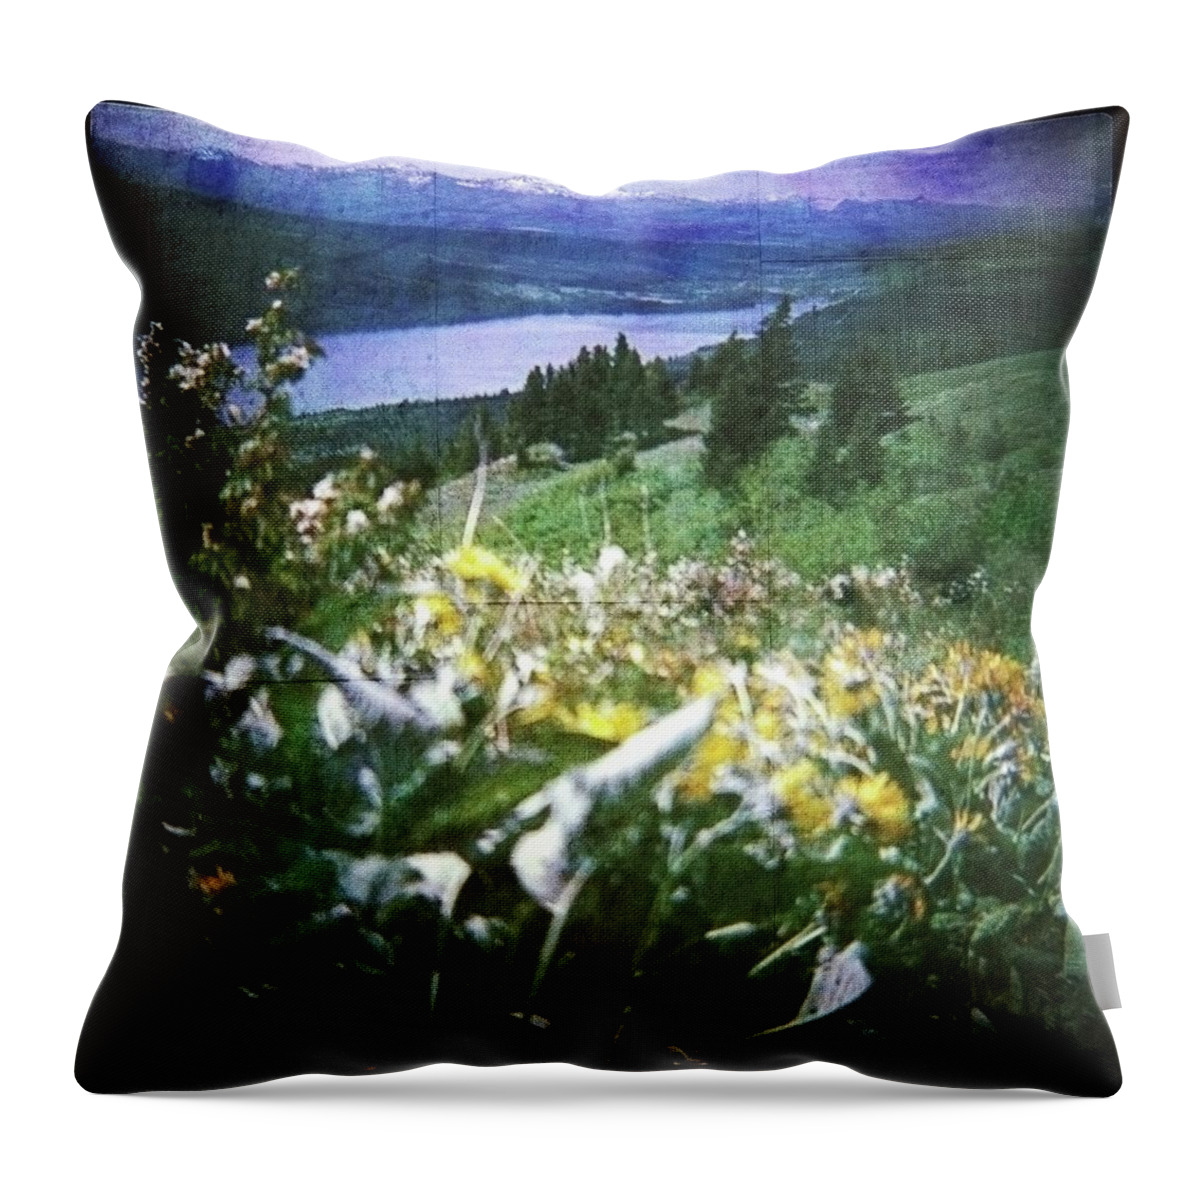 'glacier National Park' Throw Pillow featuring the photograph Dream in East Glacier by Carol Whaley Addassi